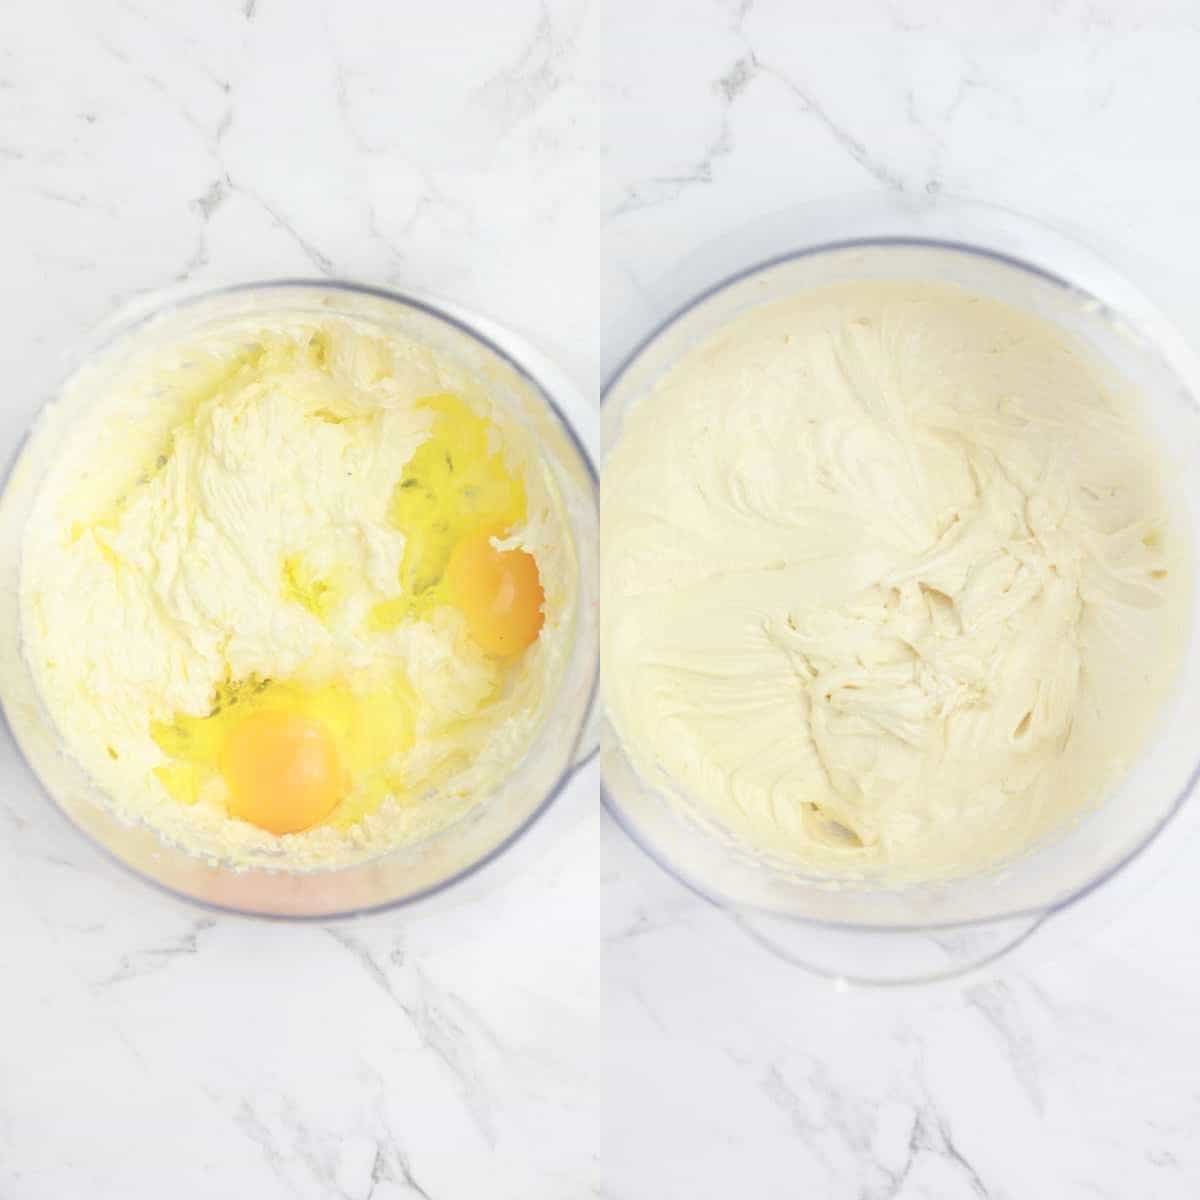 eggs added in the left bowl, and the  batter in the right bowl.